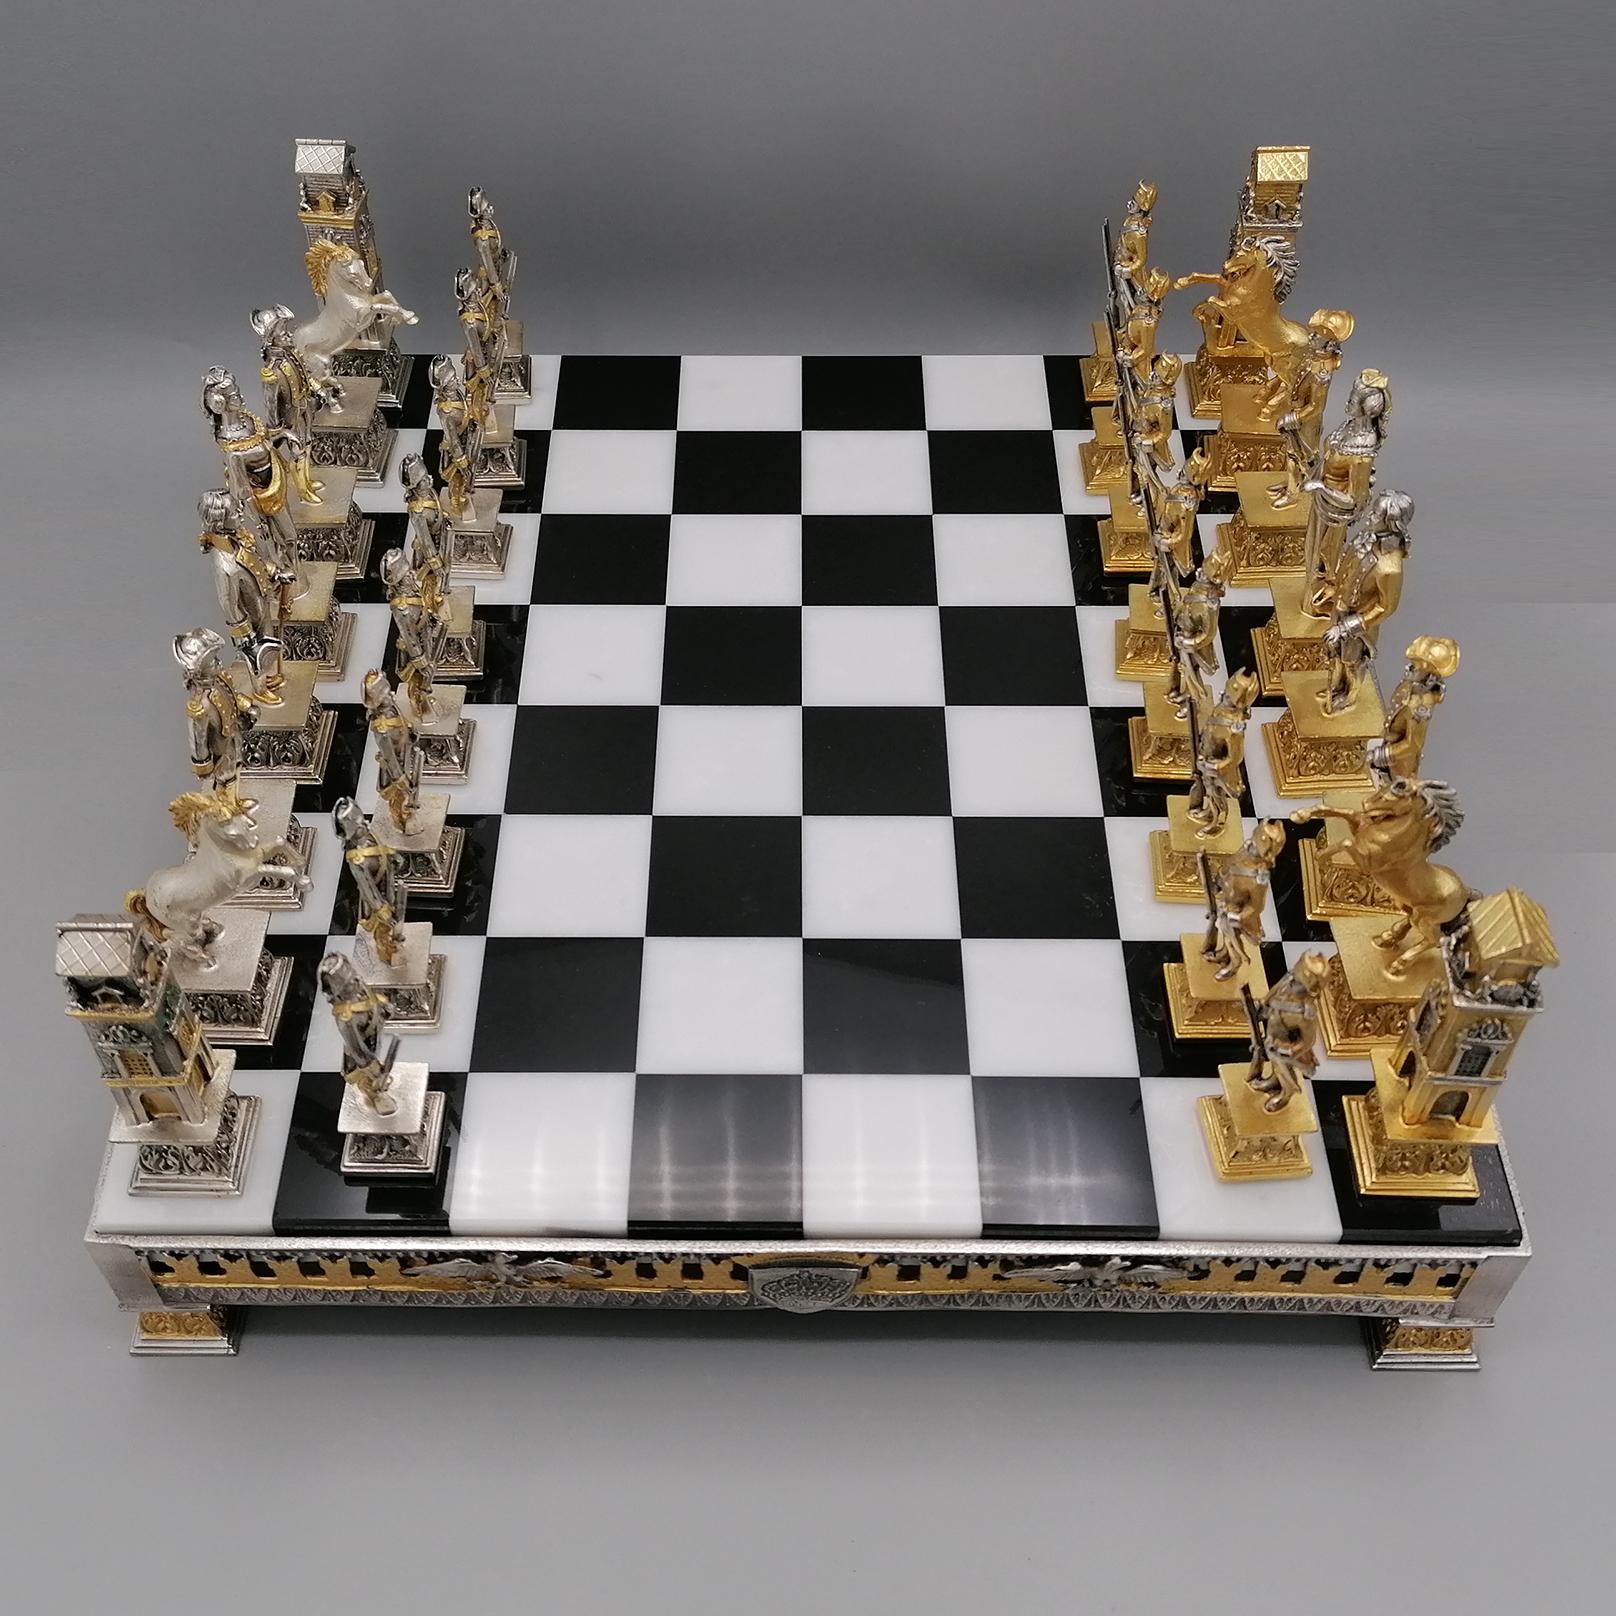 Forged 21st ceentury Italian Empire style brass chess board and game For Sale